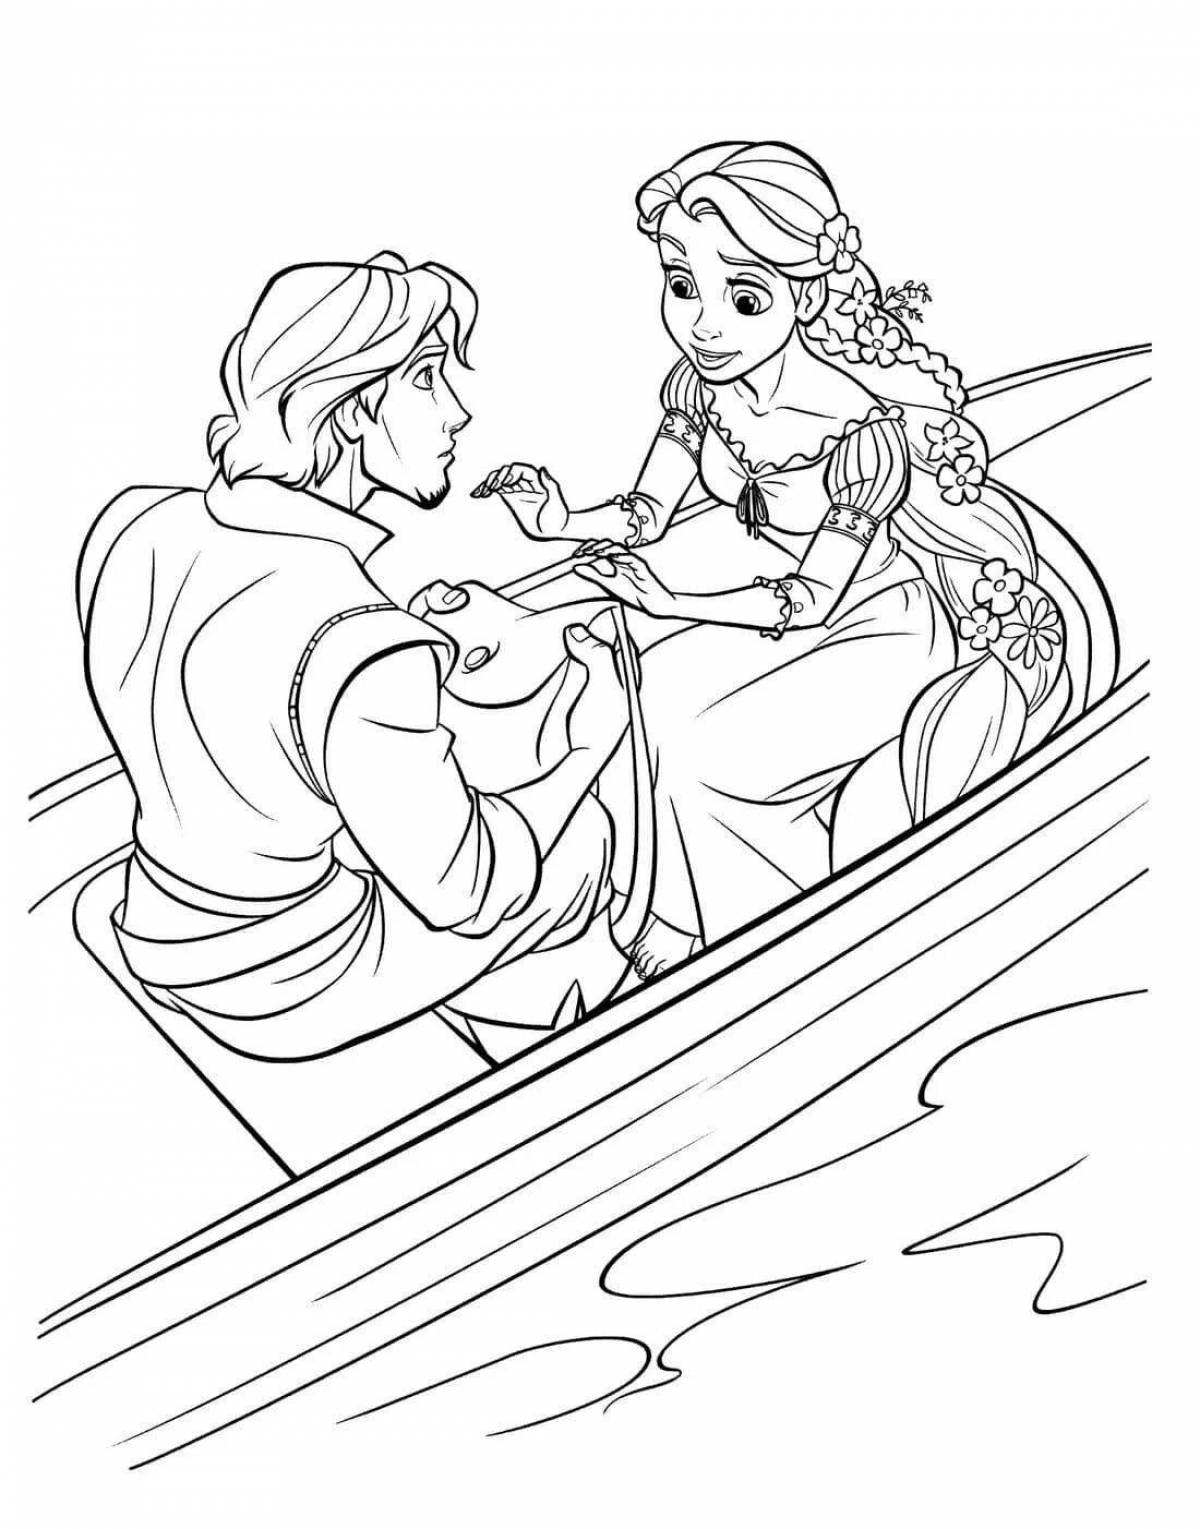 Cute rapunzel and eugene coloring book